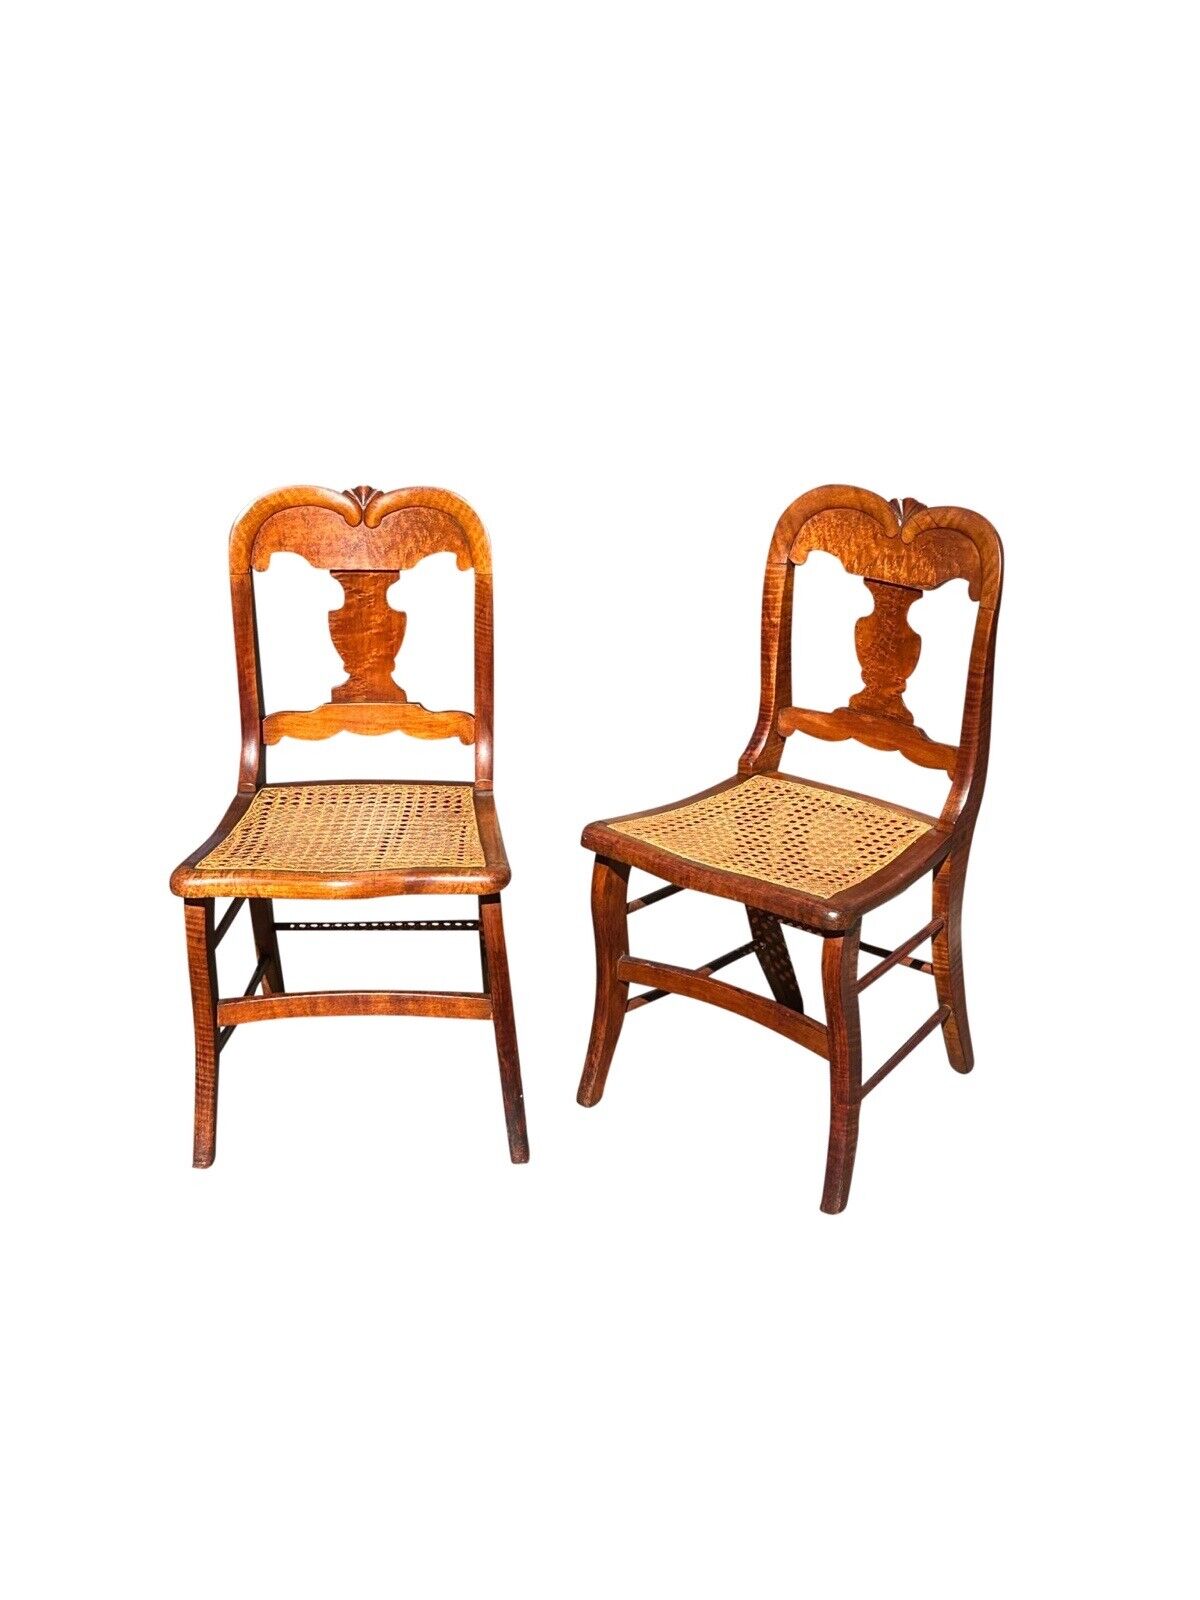 Set of Six Antique Federal Period Bird's Eye & Tiger Maple Country Dining Chairs